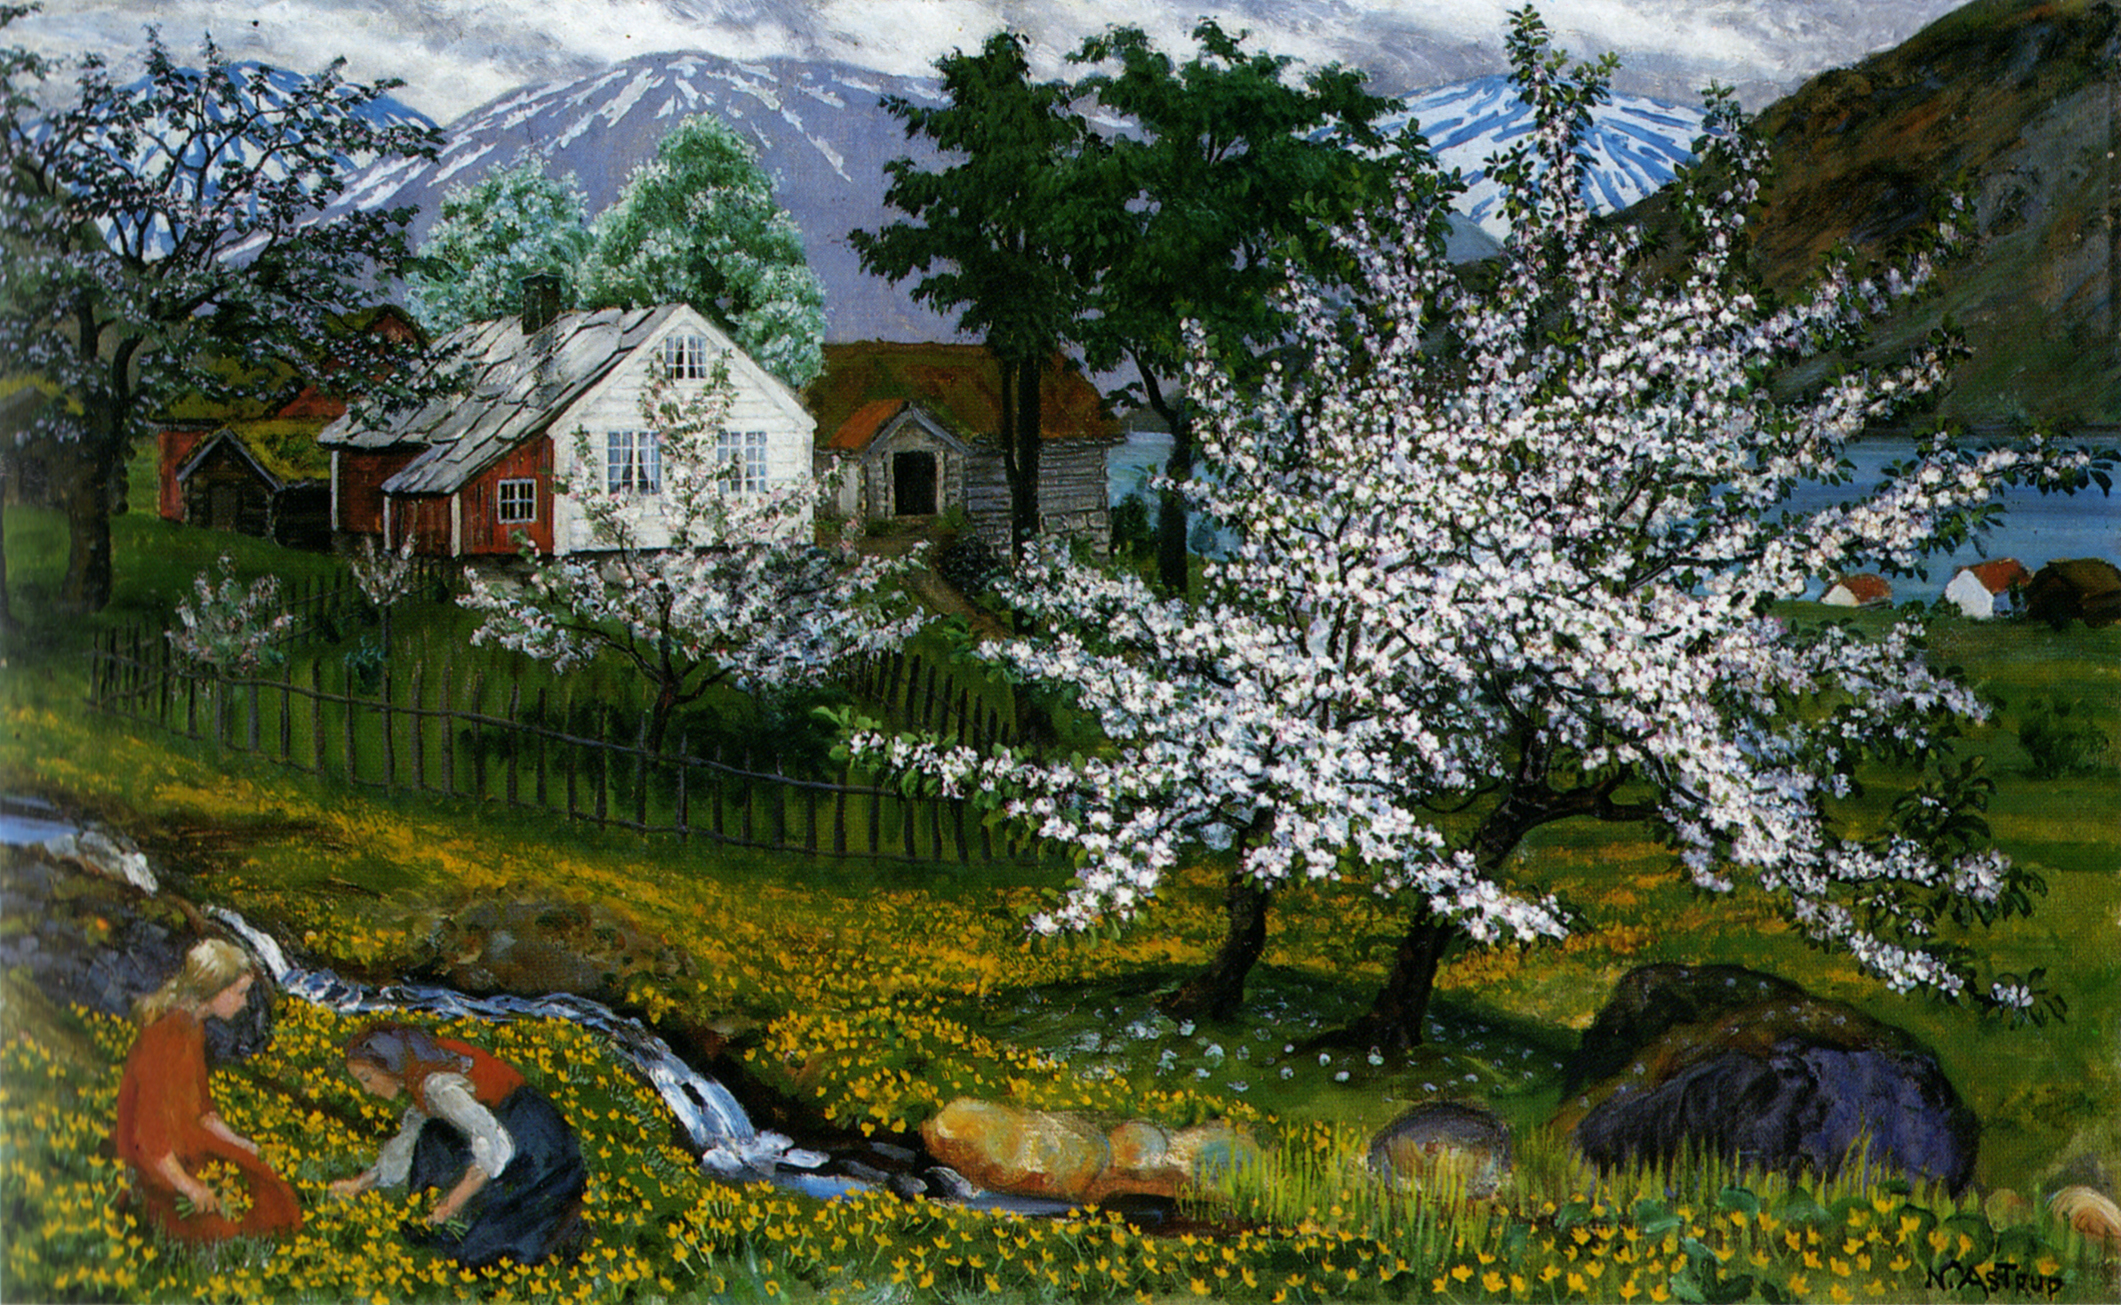 Apple Trees in Bloom by Nikolai Astrup - c. 1927 - 54 x 88 cm private collection